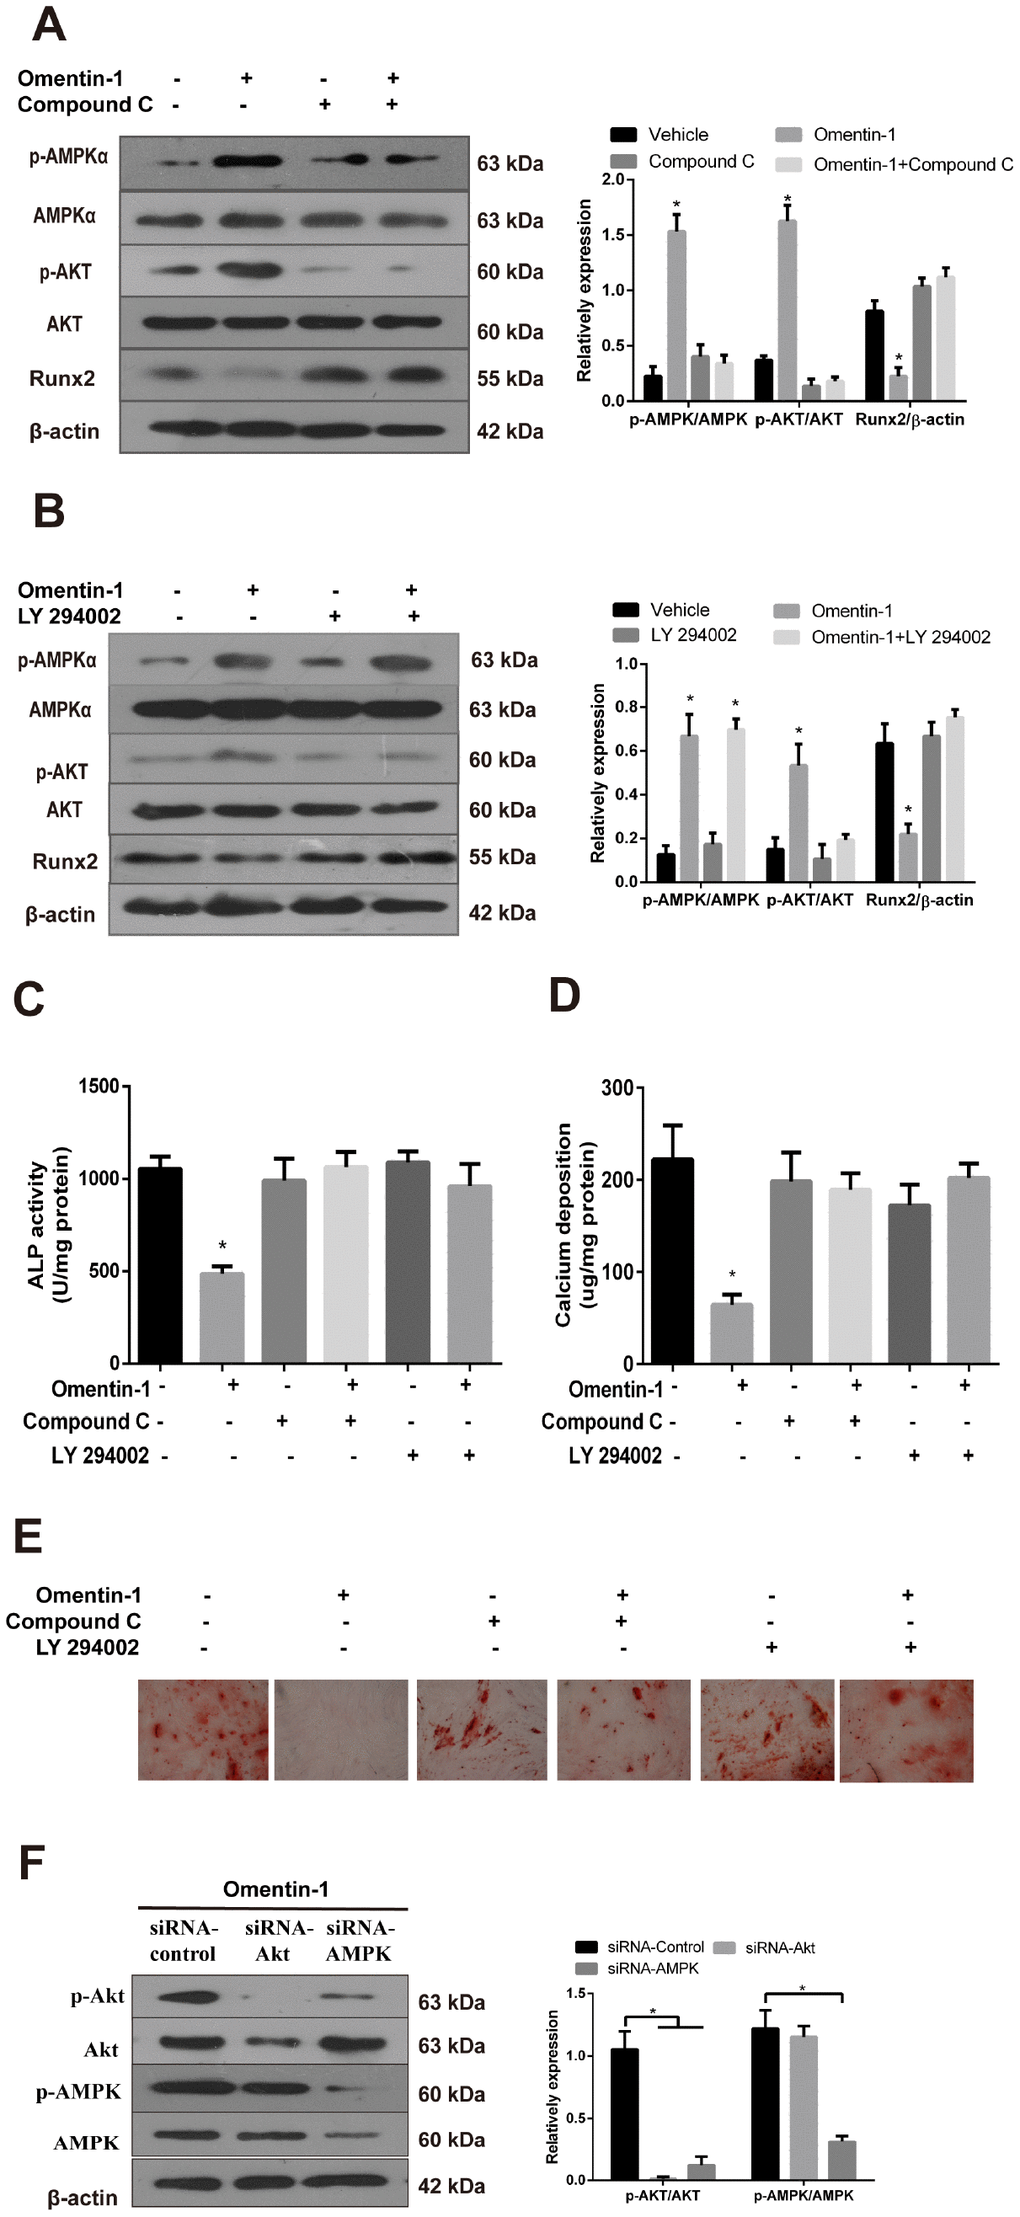 The AMPK/Akt signaling pathway mediates omentin-1-induced inhibition effects on osteoblastic differentiation and mineralisation of CVSMCs. CVSMCs were stimulated by Compound C (10 μM) or LY 294002 (30 μM) for 30 min and then treated with omentin-1 (400 ng/ml) for 48 hours. The cell lysates were tested by western blot and incubated with antibodies against p-AMPKα, AMPKα, p-Akt, Akt and Runx2. (A, B) Representative results were shown in the left panel and the data were presented as densitometric ratios of p-AMPK/AMPK, p-Akt/Akt and Runx2/β–actin respectively (lower panel). (C) The ALP activity was measured by ALP kit. Results are represented by mean ± SD with 3 replicates for each group. (*p D, E) CVSMCs were treated with Compound C (10 μM) or LY 294002 (30 μM) for 30 min and then treated with omentin-1 (400 ng/ml) every two days for a period of 14 days. Calcium deposition was tested (D) and represented microscopic pictures of Alizarin Red S staining view were shown (E). (F) Expression of p-AMPK and p-Akt in CVSMCs after AMPK or Akt knockdown were analyzed by western blot. All Results are represented by mean ± SD with 3 replicates for each group. One-way ANOVA with the Tukey’s HSD post hoc analysis was adopted.